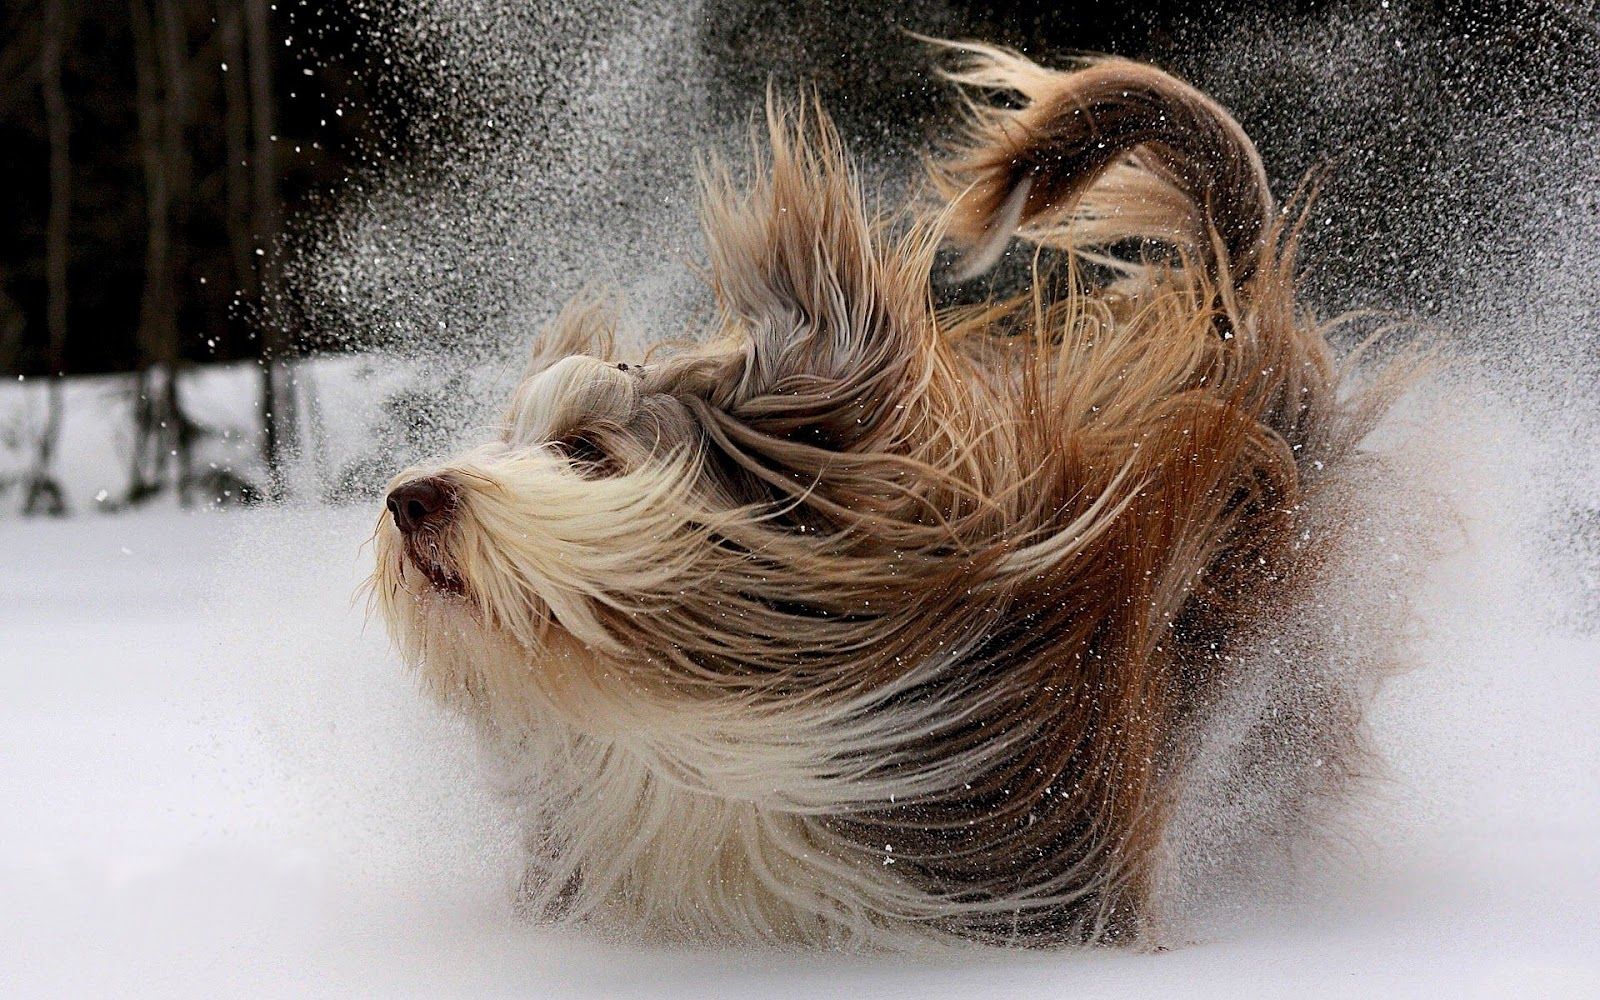 Dog playing in the snow wallpaper. HD Animals Wallpaper